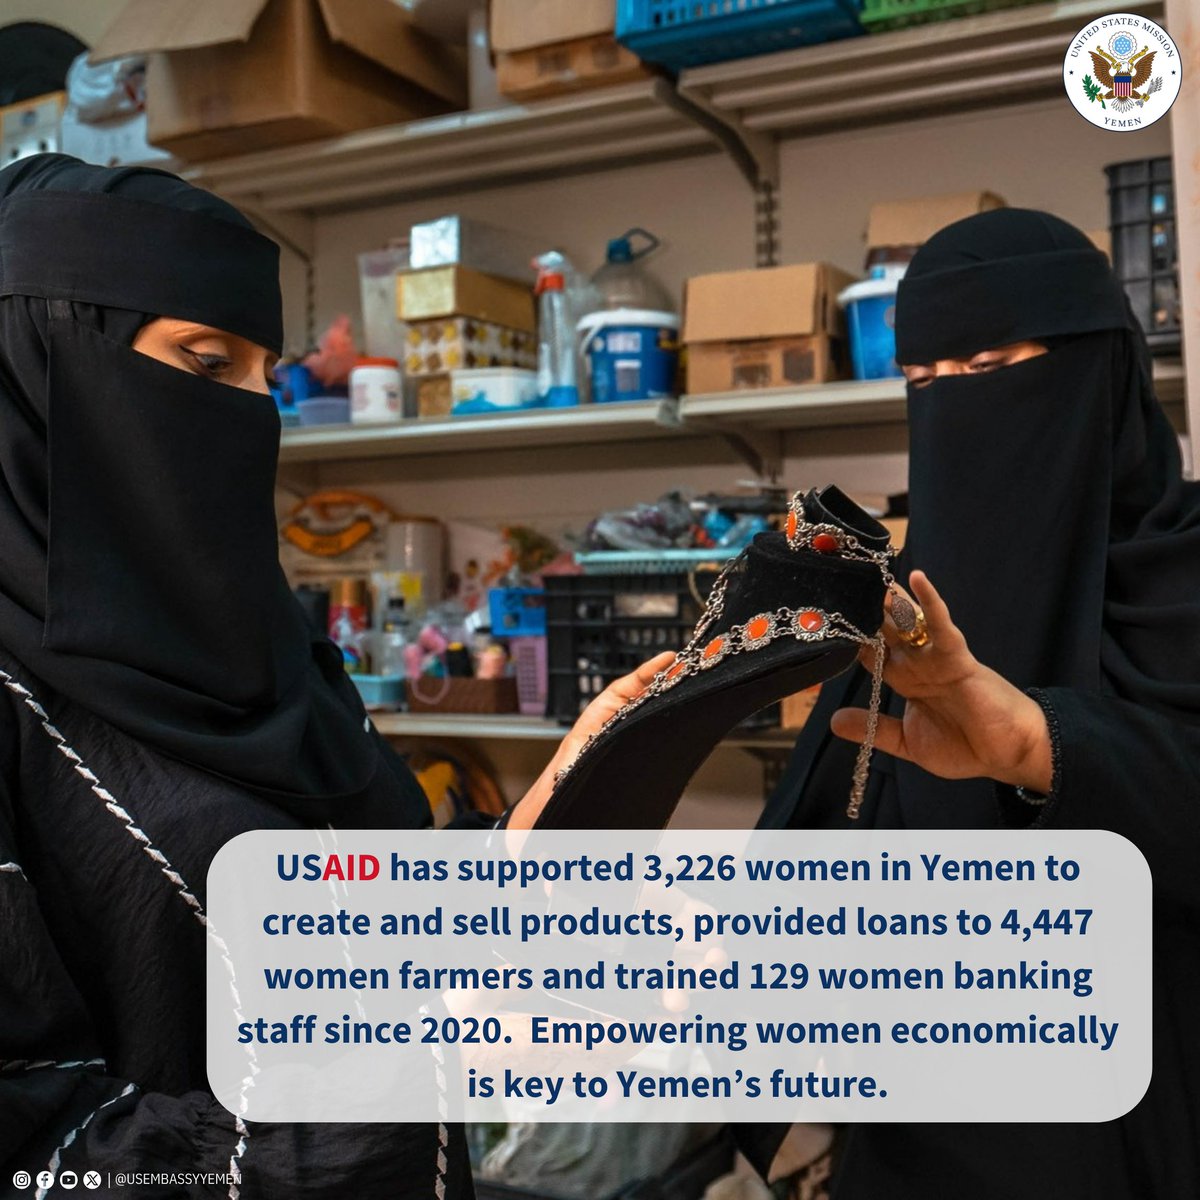 We know that when women are economically empowered, they can make transformational contributions to their societies. @USAID support improves Yemeni women’s capacity to access credit, find sustainable jobs, and increase their economic power and resilience. @USAIDMiddleEast